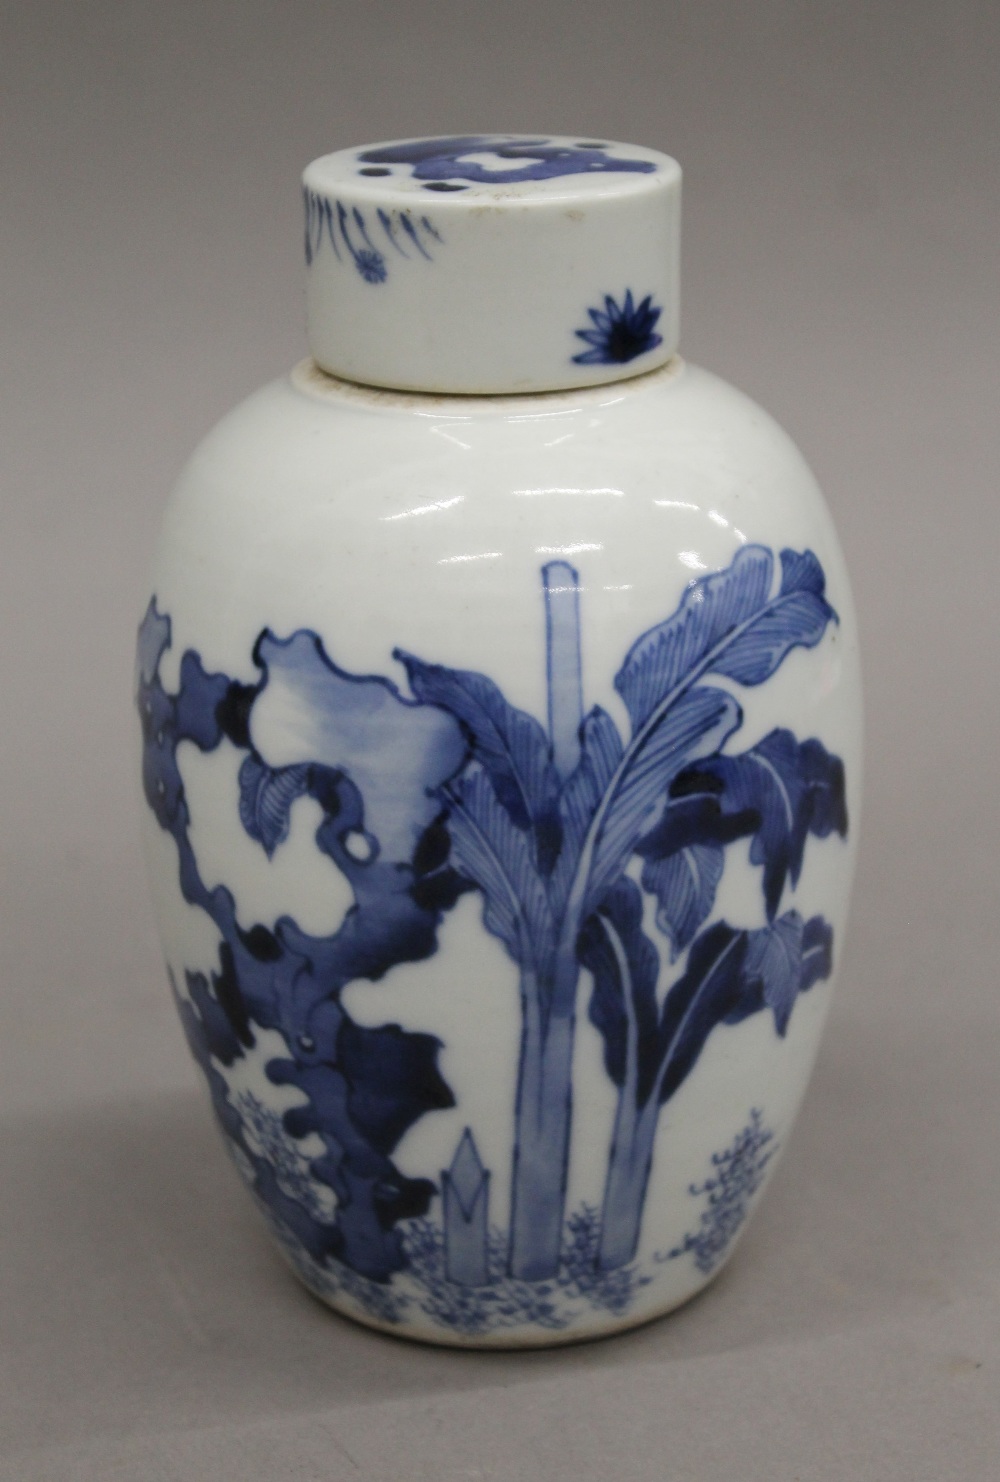 An 18th century Chinese blue and white porcelain tea caddy. 15 cm high. - Image 5 of 7